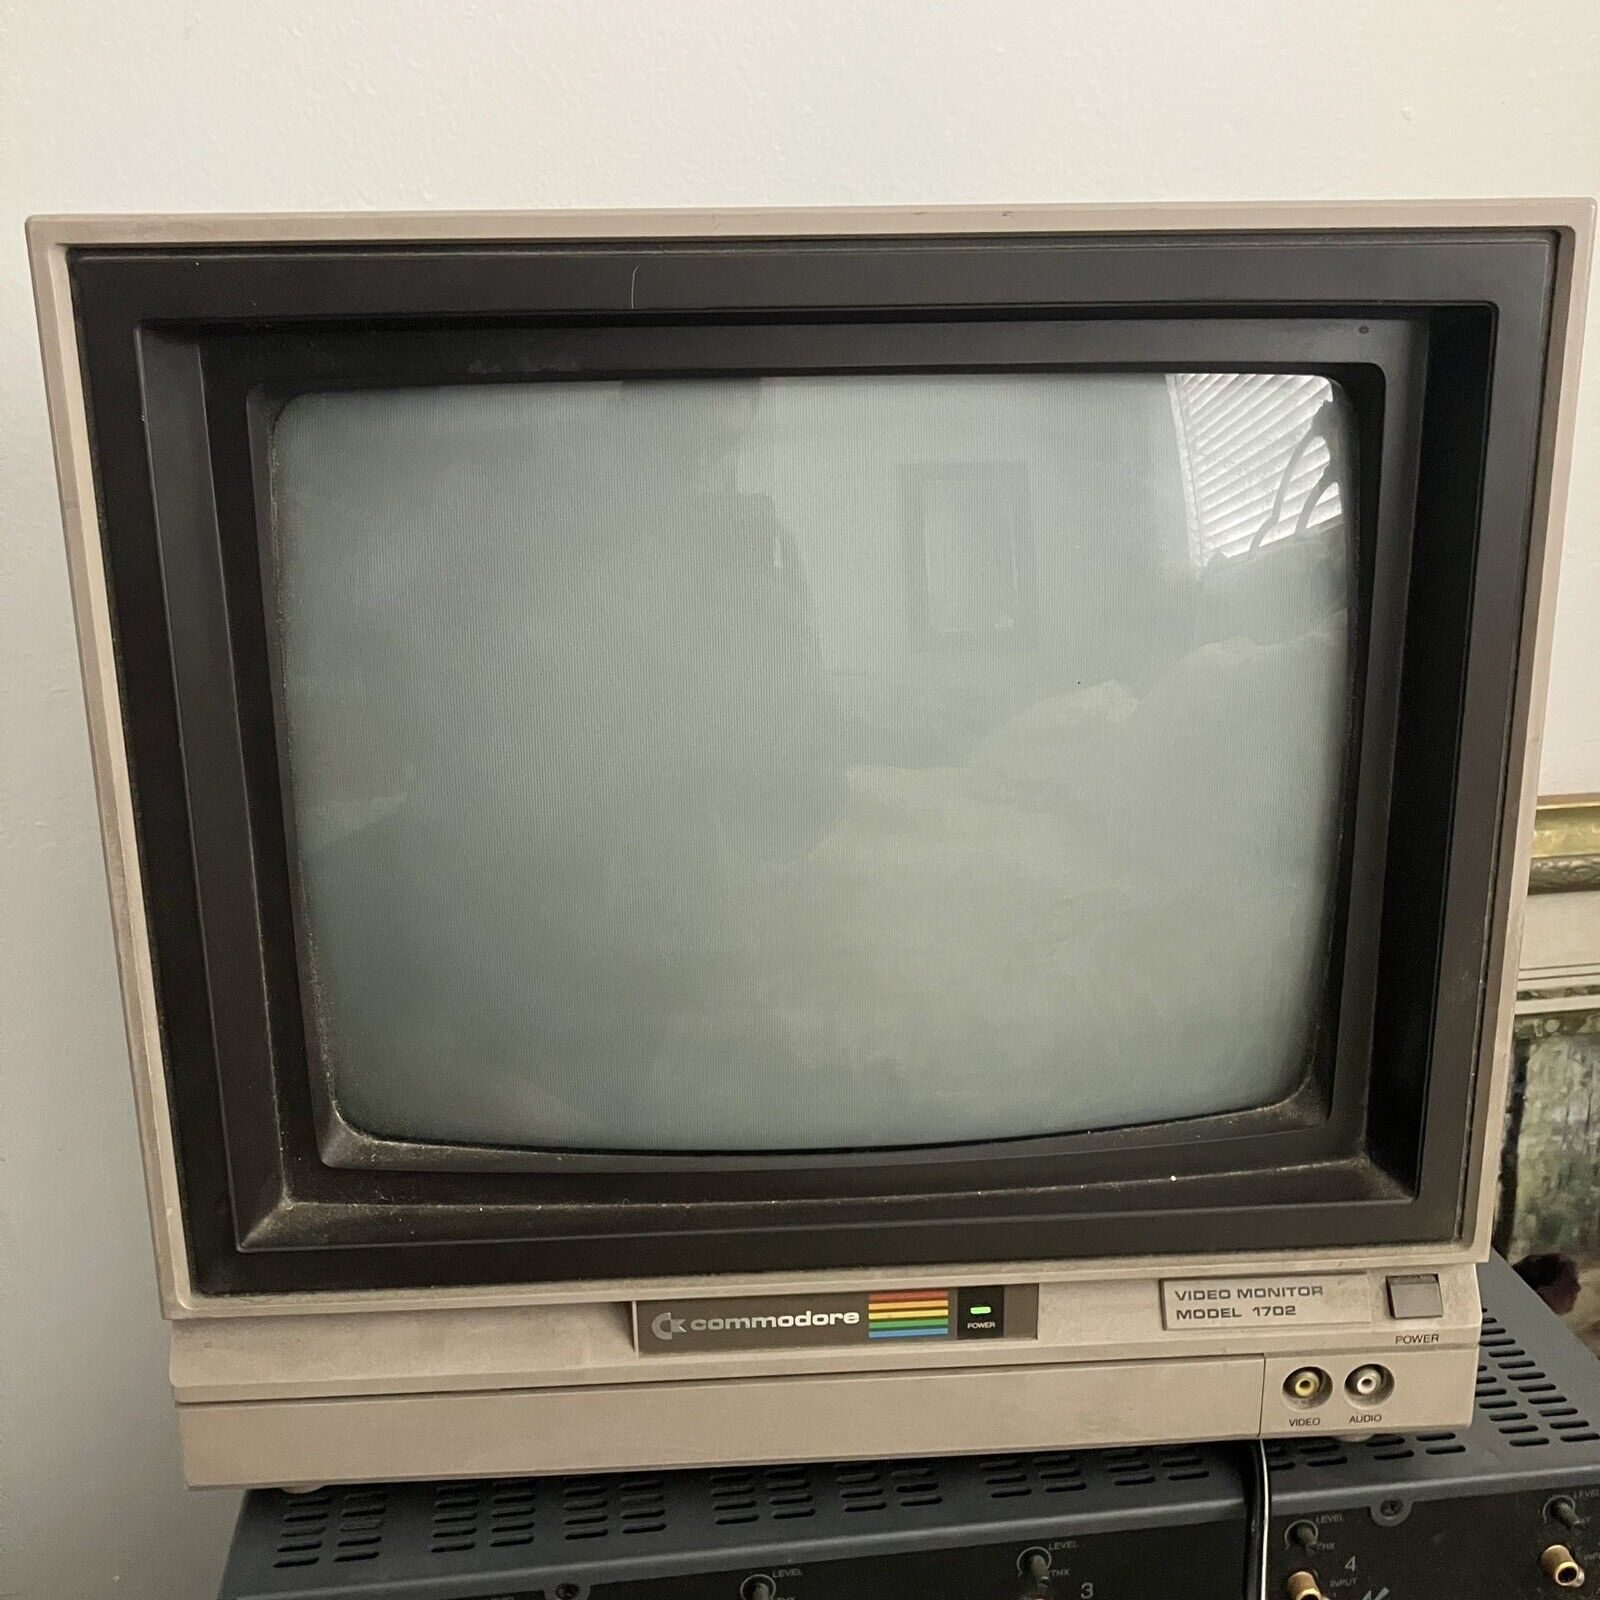 Commodore 1702 CRT Monitor built-in speakers